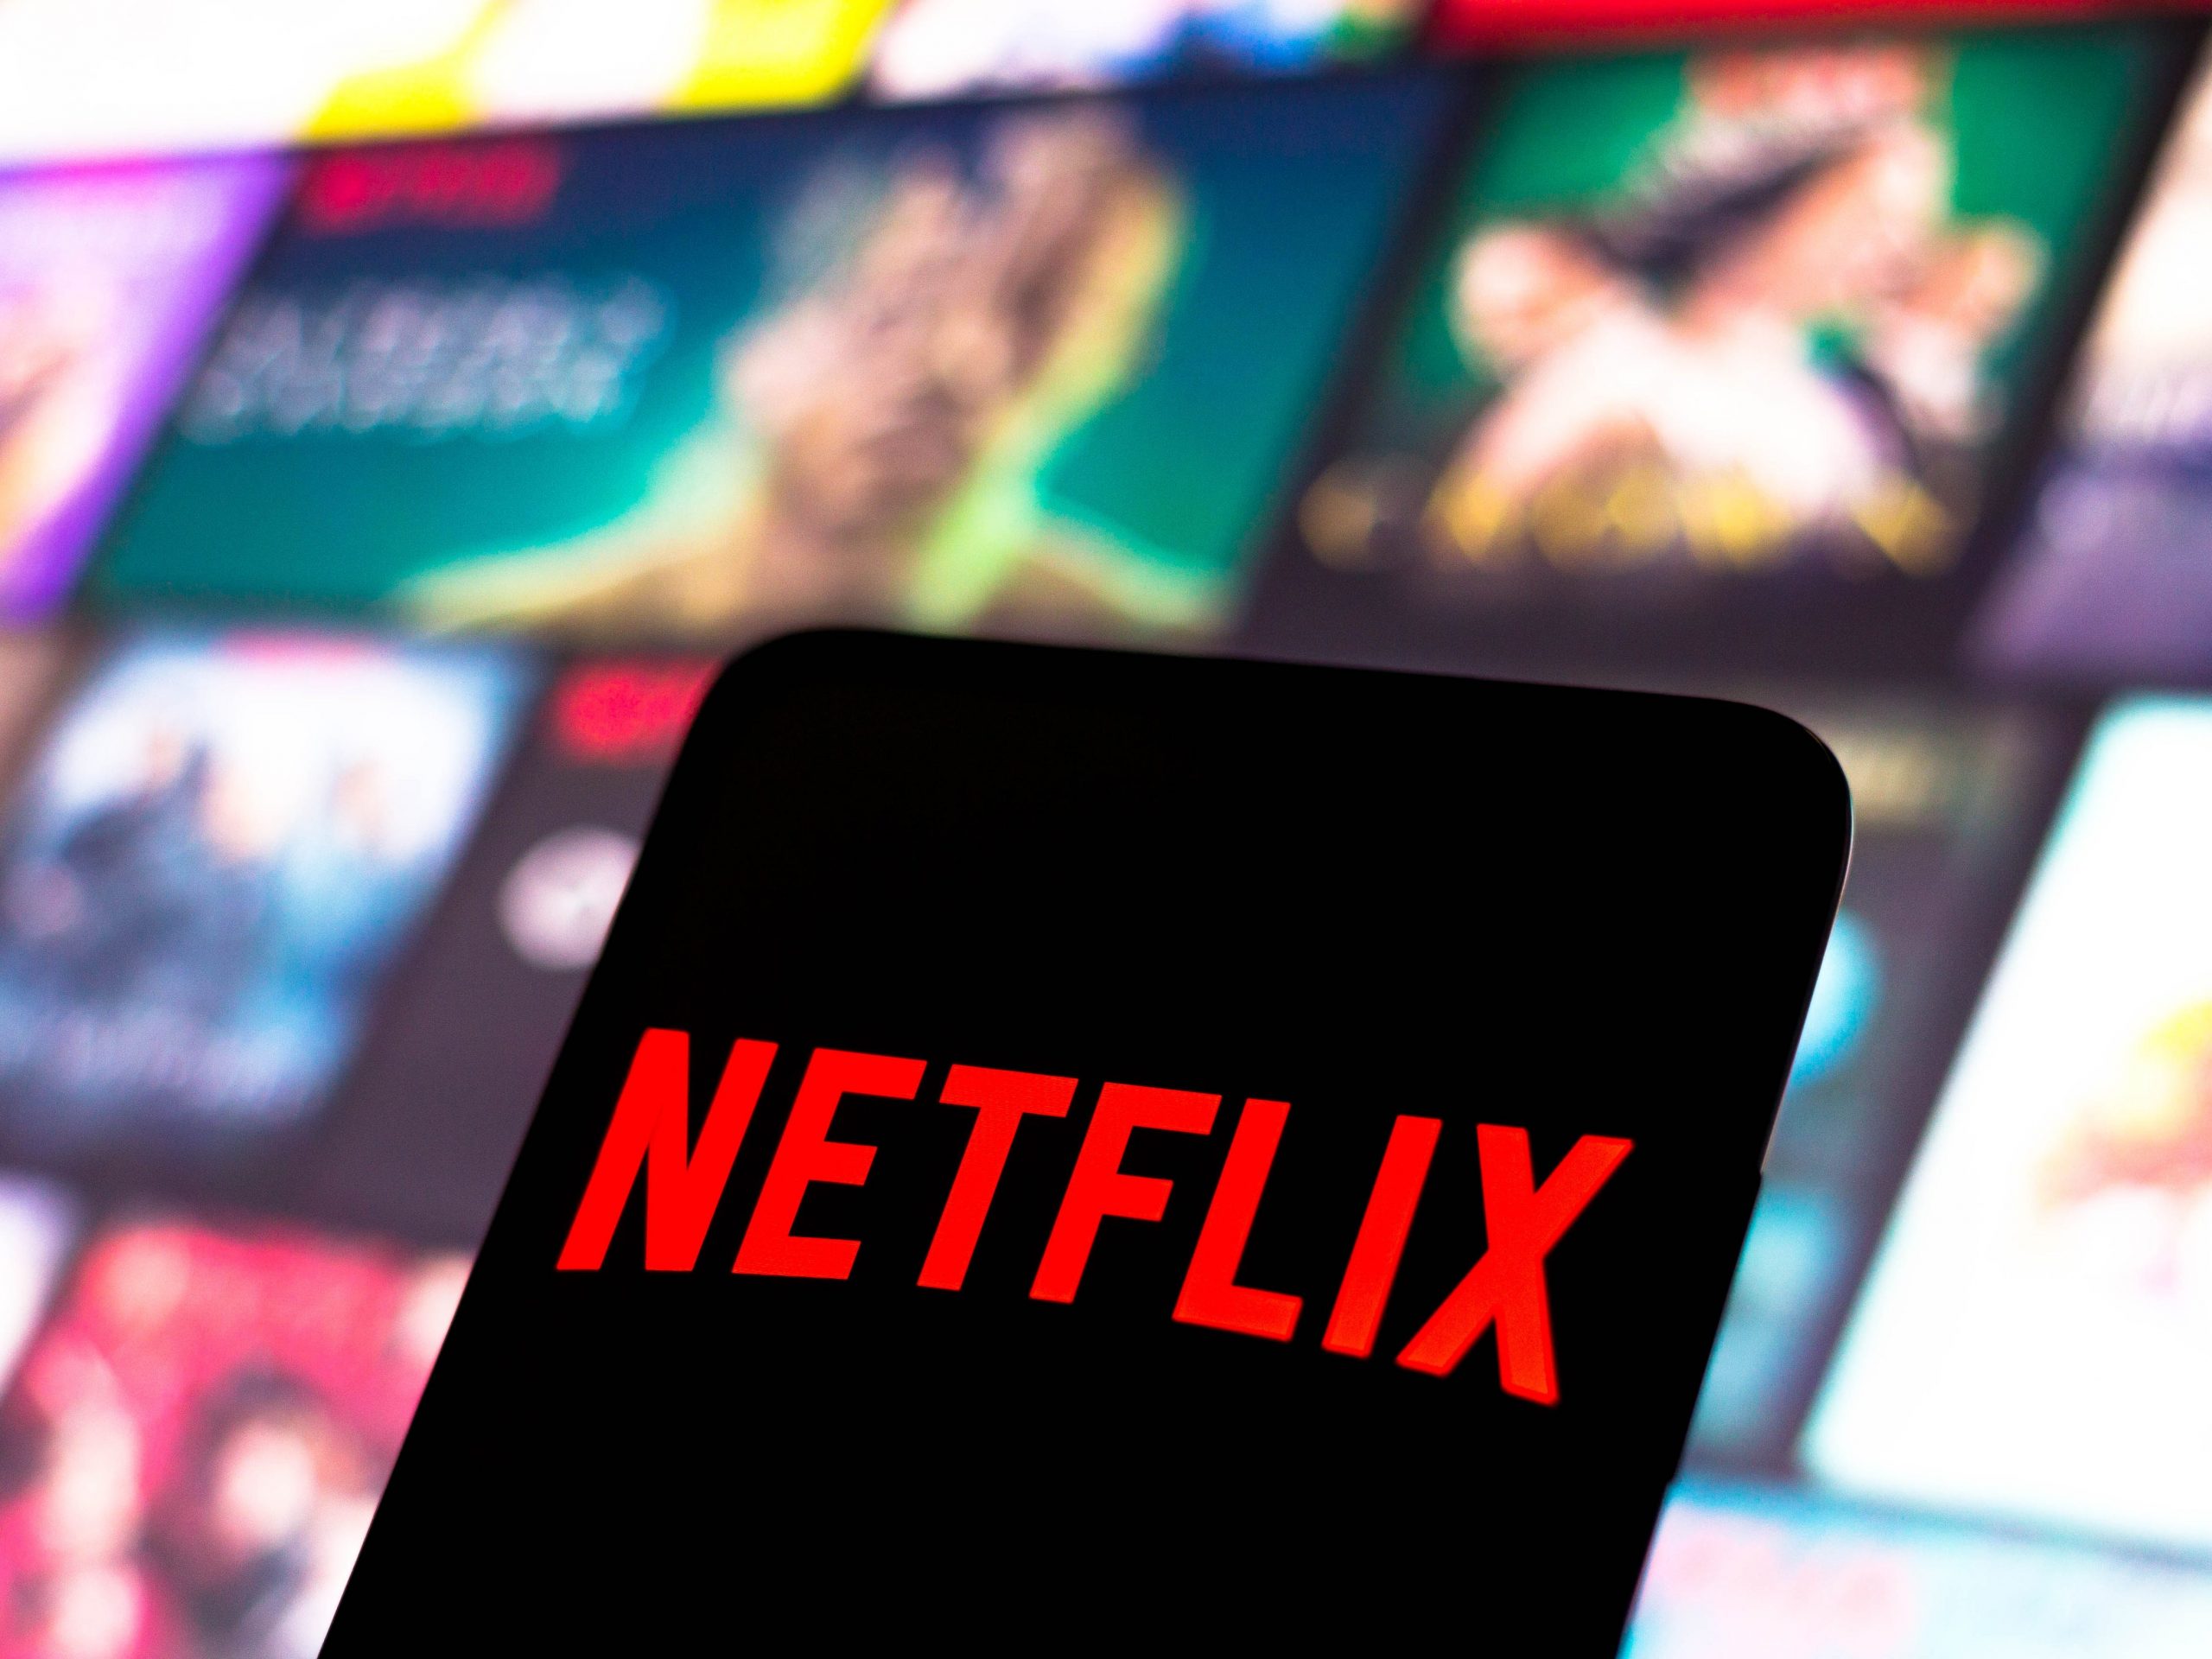 The Netflix logo is displayed on a smartphone screen.